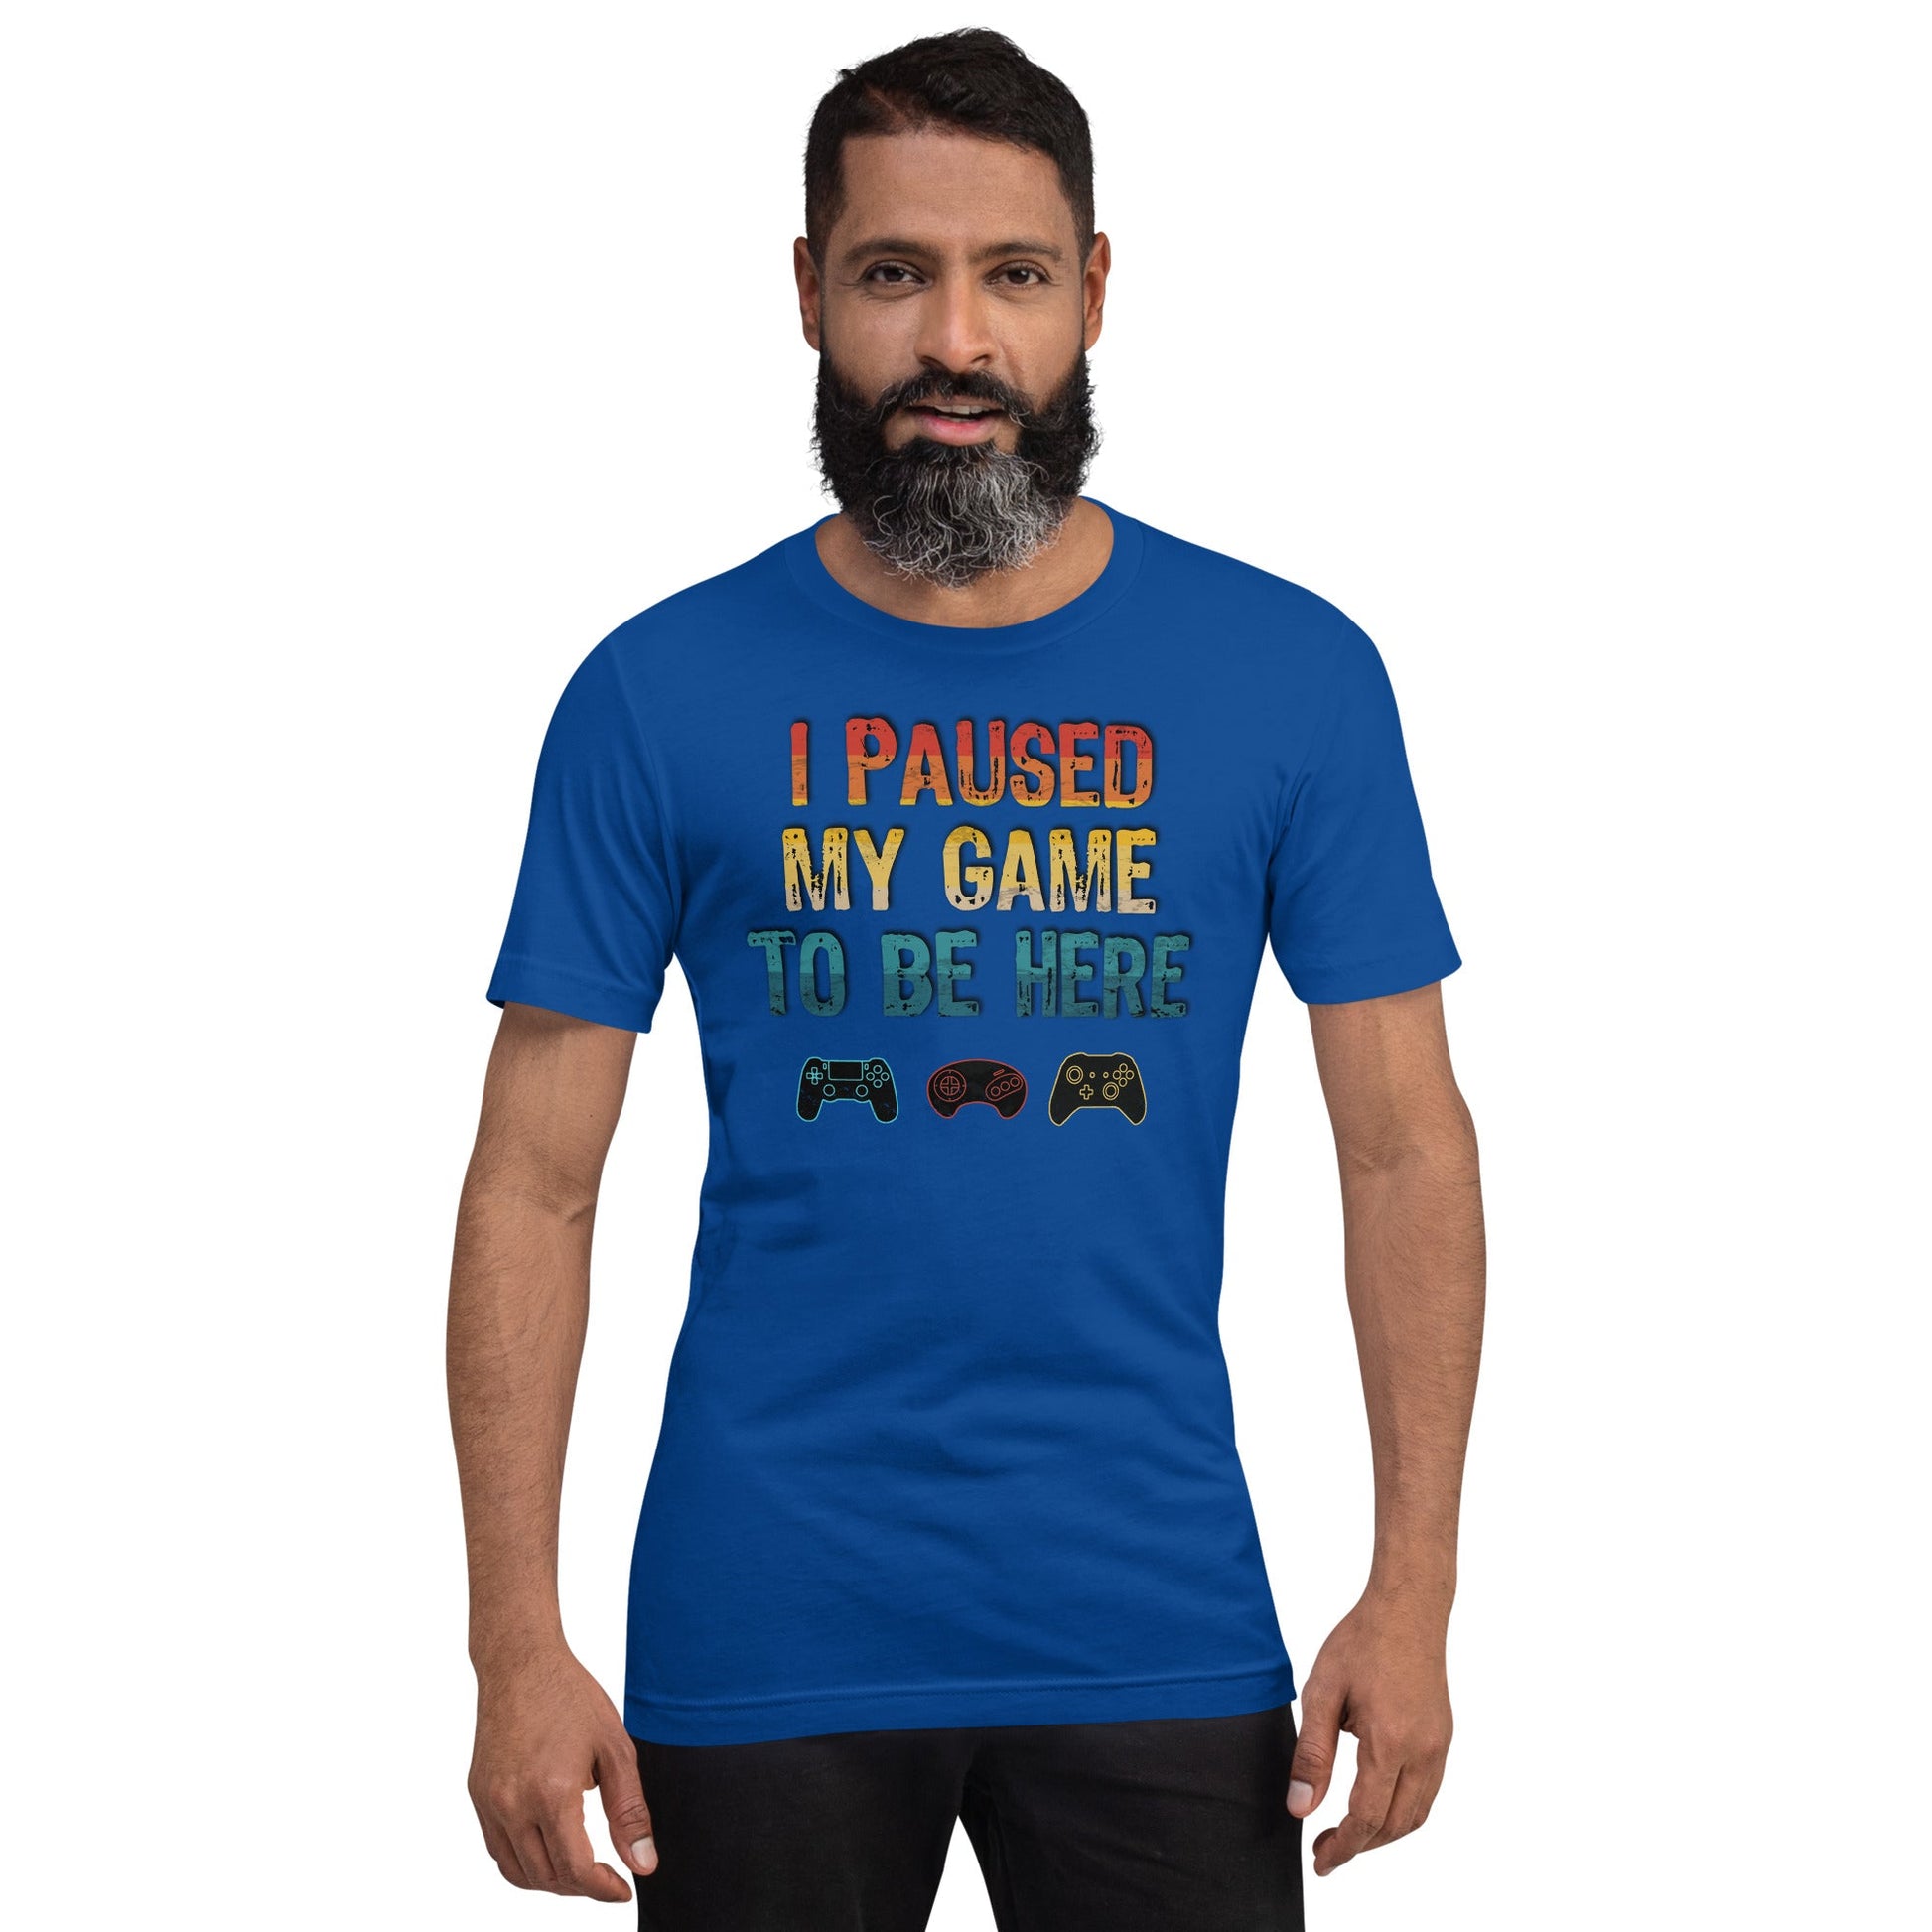 Scar Design I paused my game to be here T-shirt